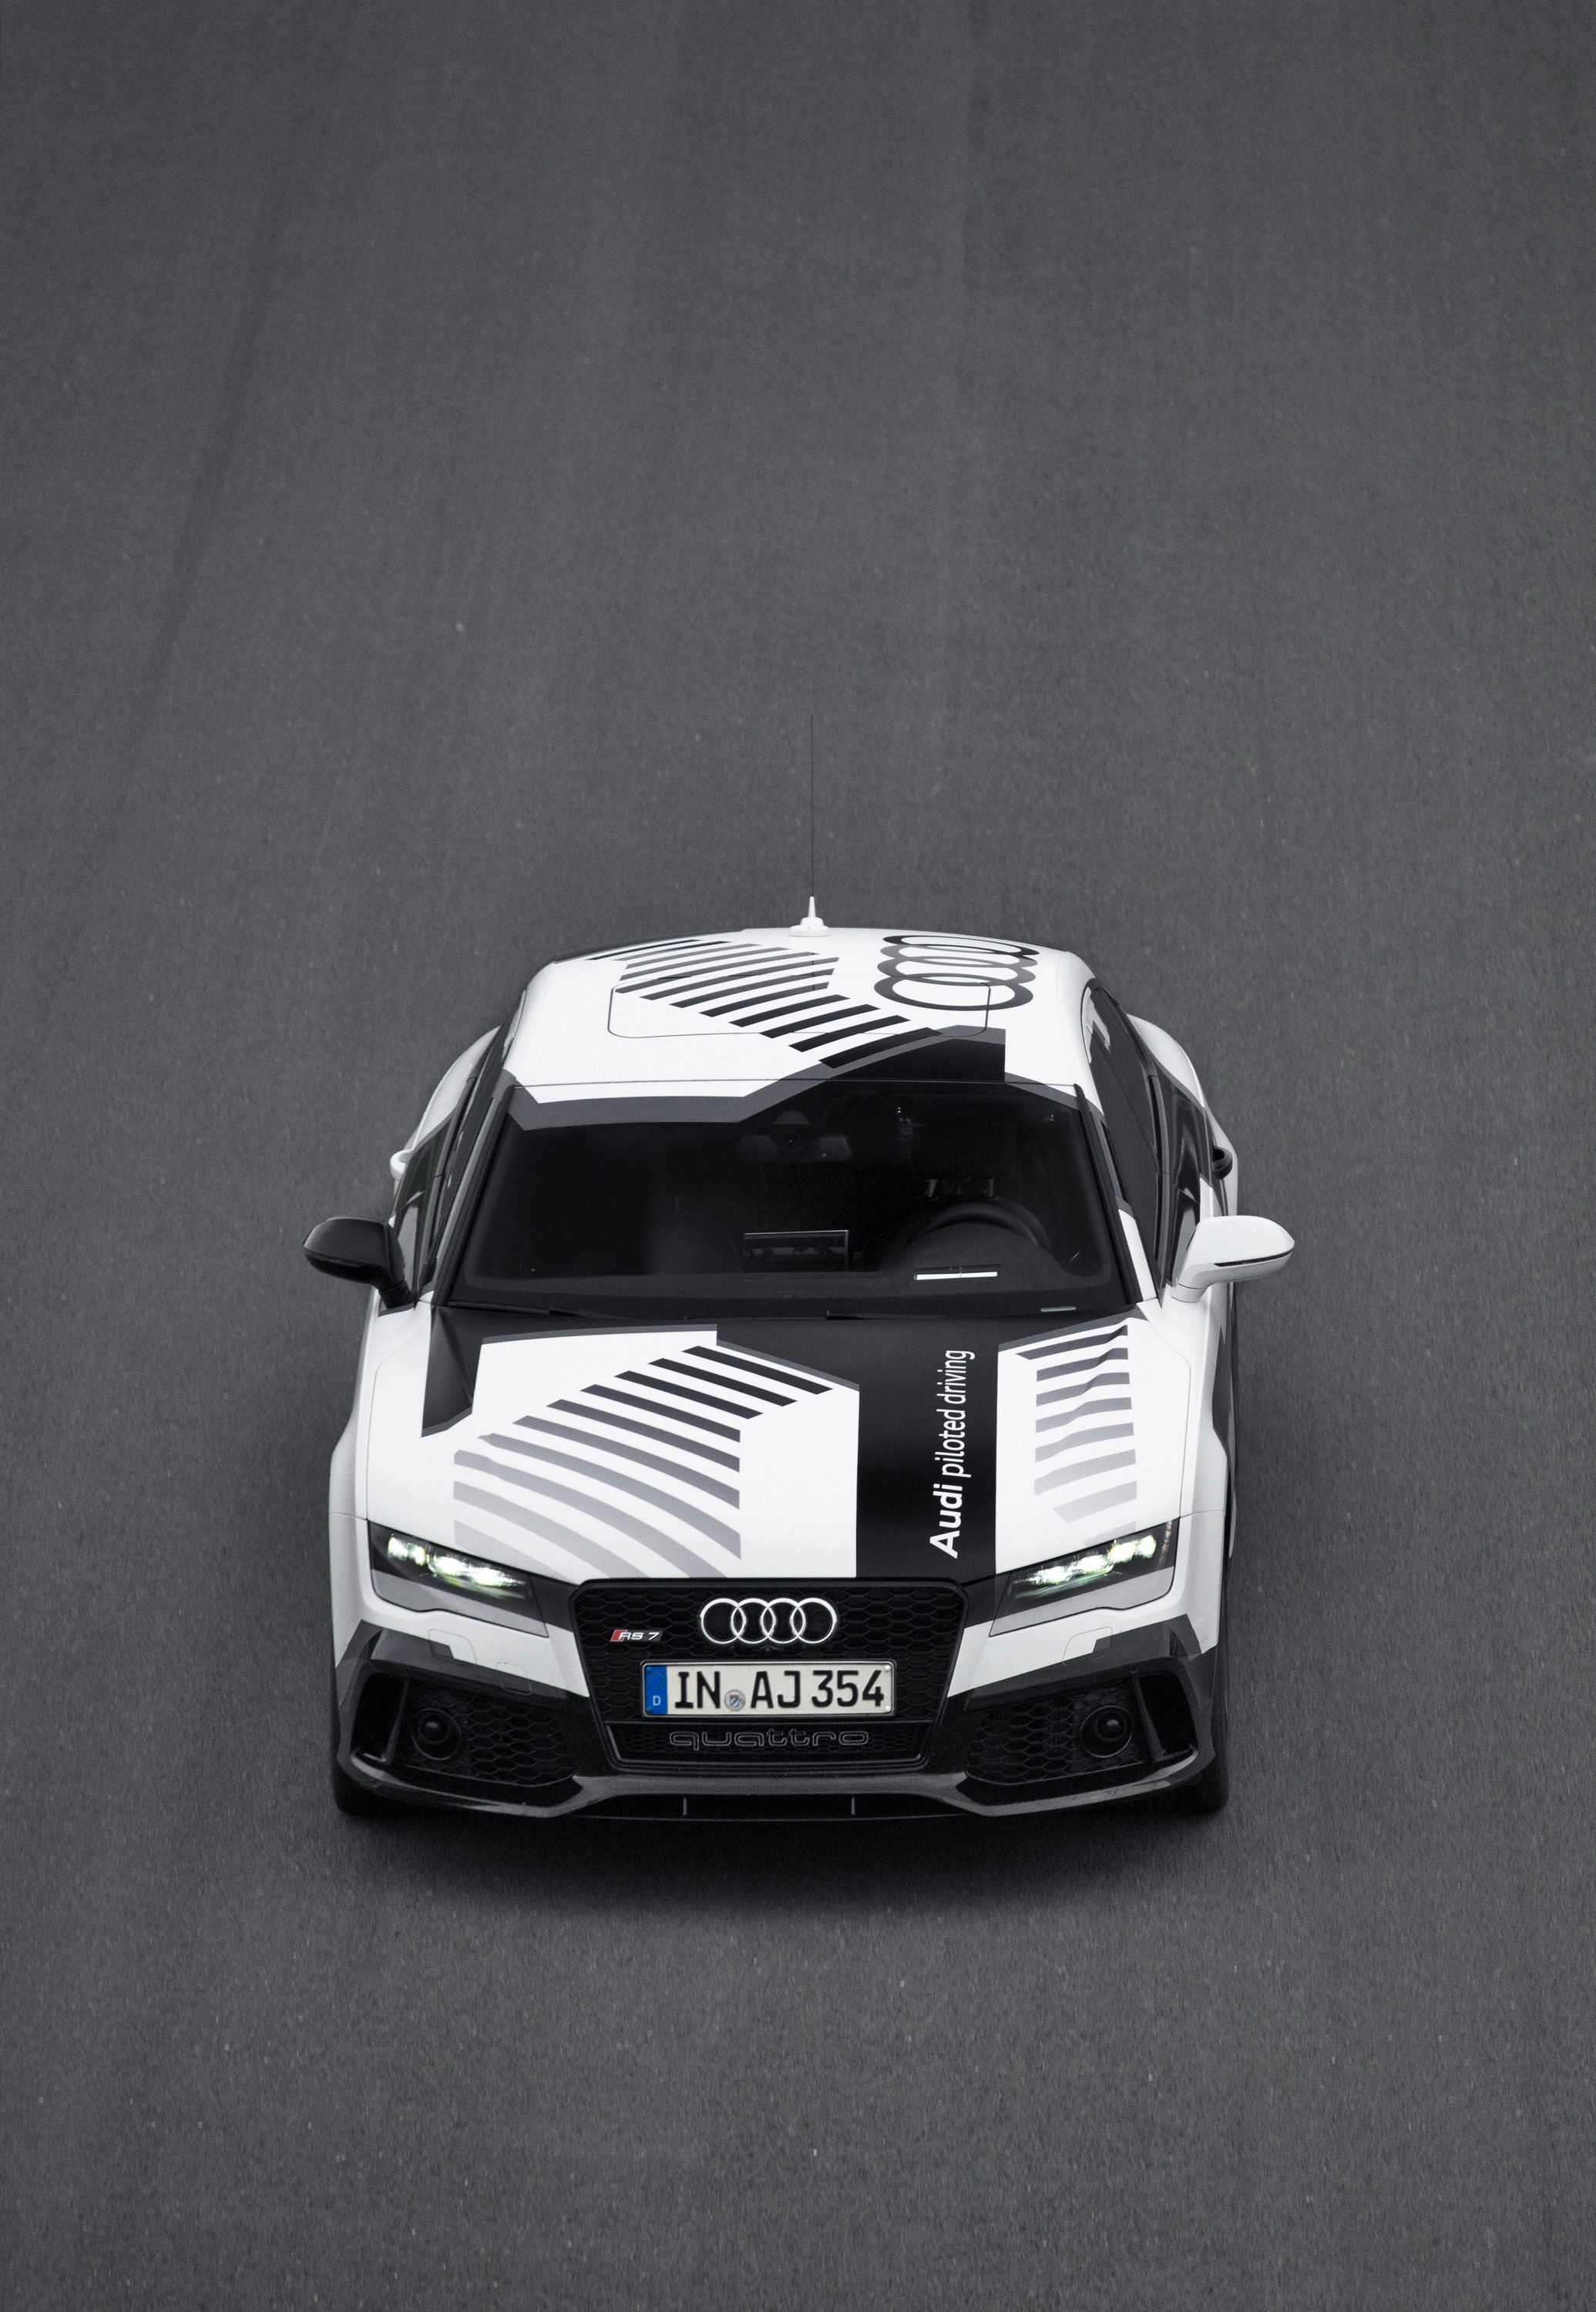 2015 Audi RS7 Piloted Driving Concept